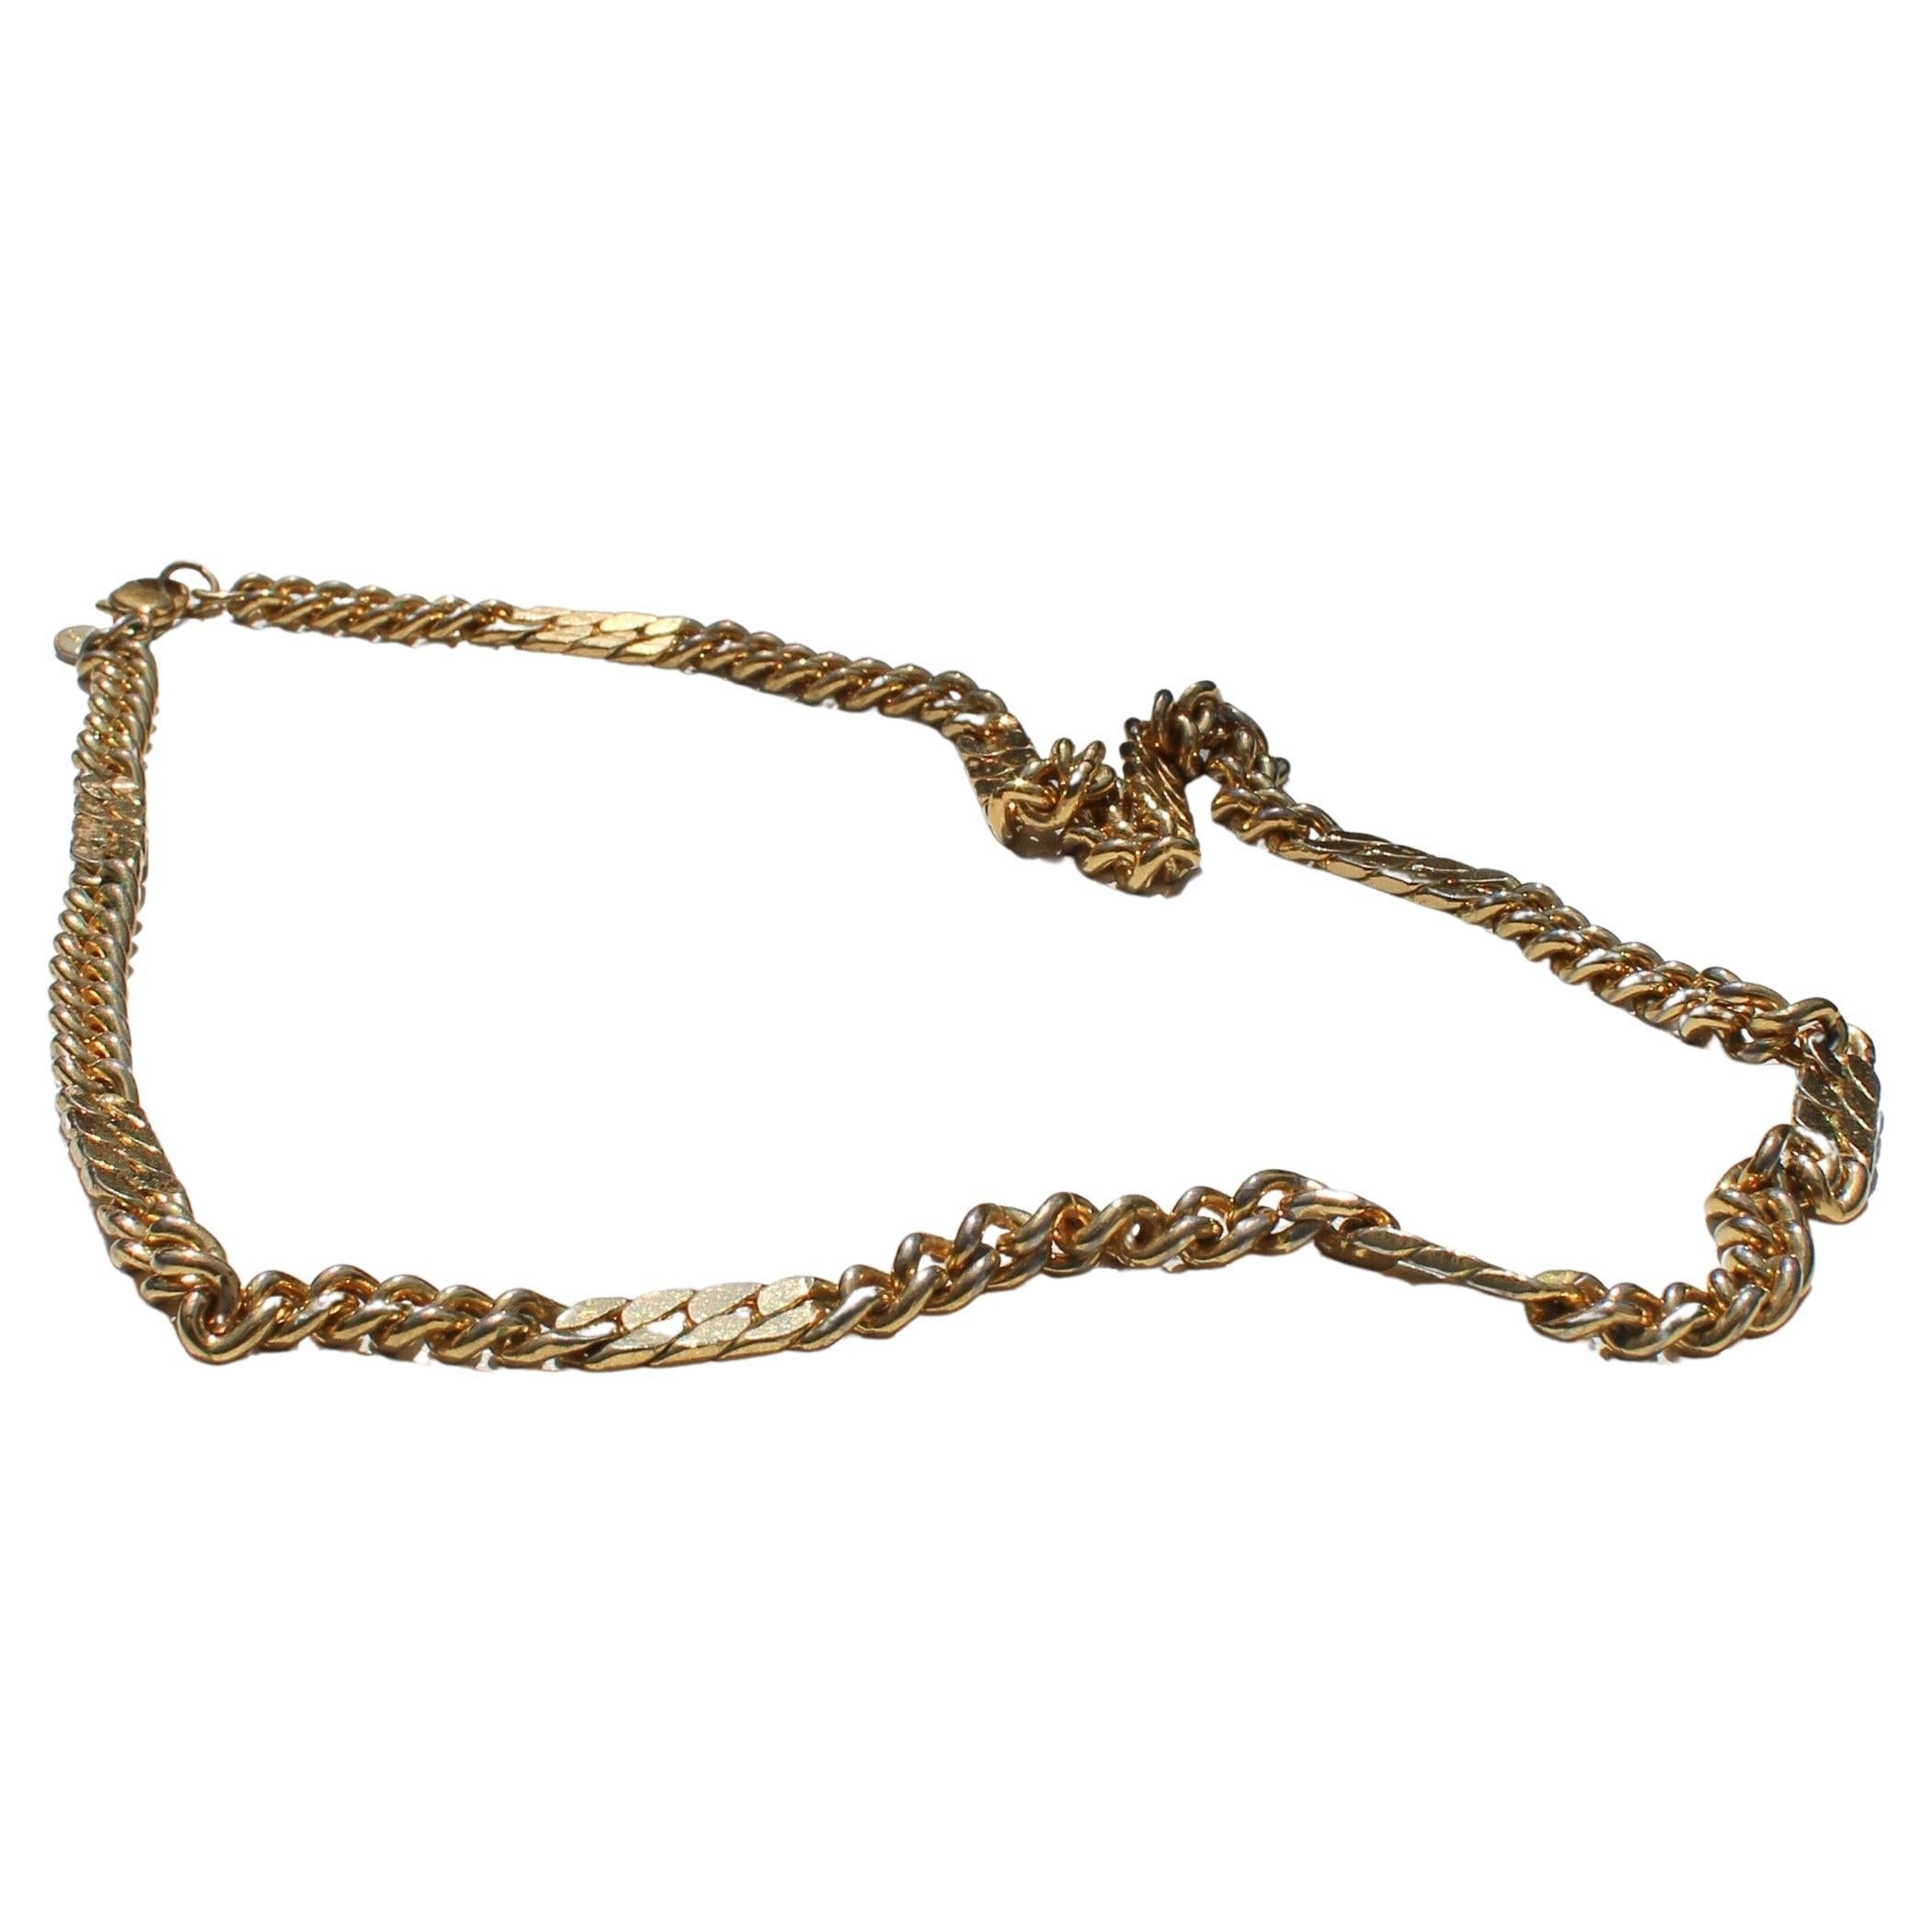 Buy Vintage Monet 16 Gold Tone Chain Necklace 844 Very Thin Chain Online in  India - Etsy